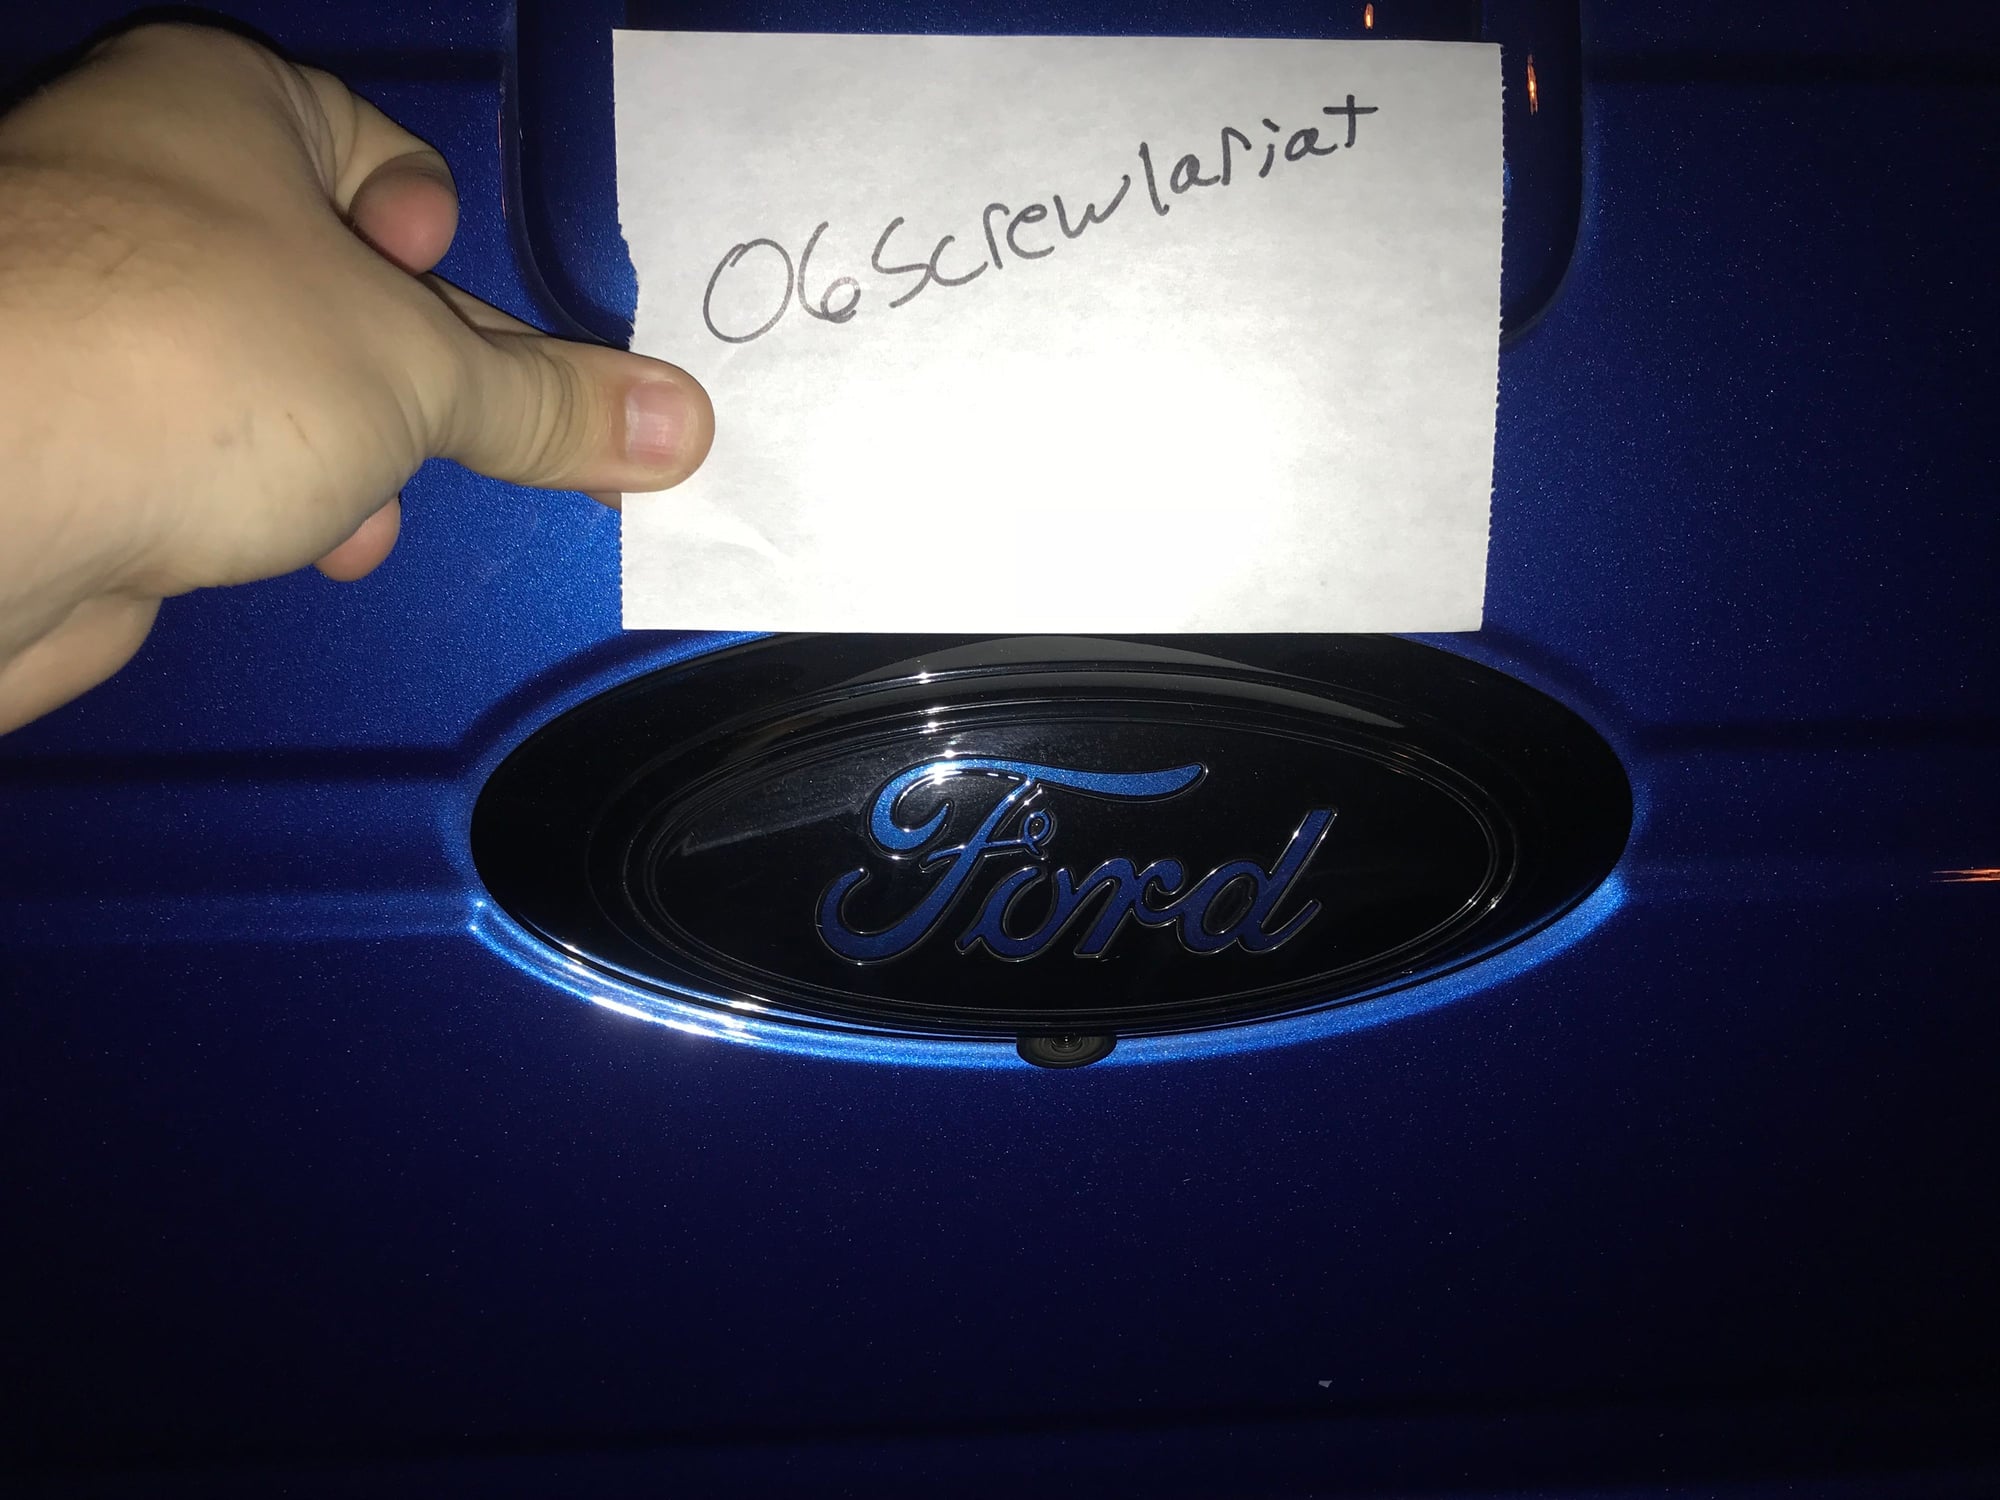 Poll: Which Do You Prefer - Ford Oval Badging Or Ford Script